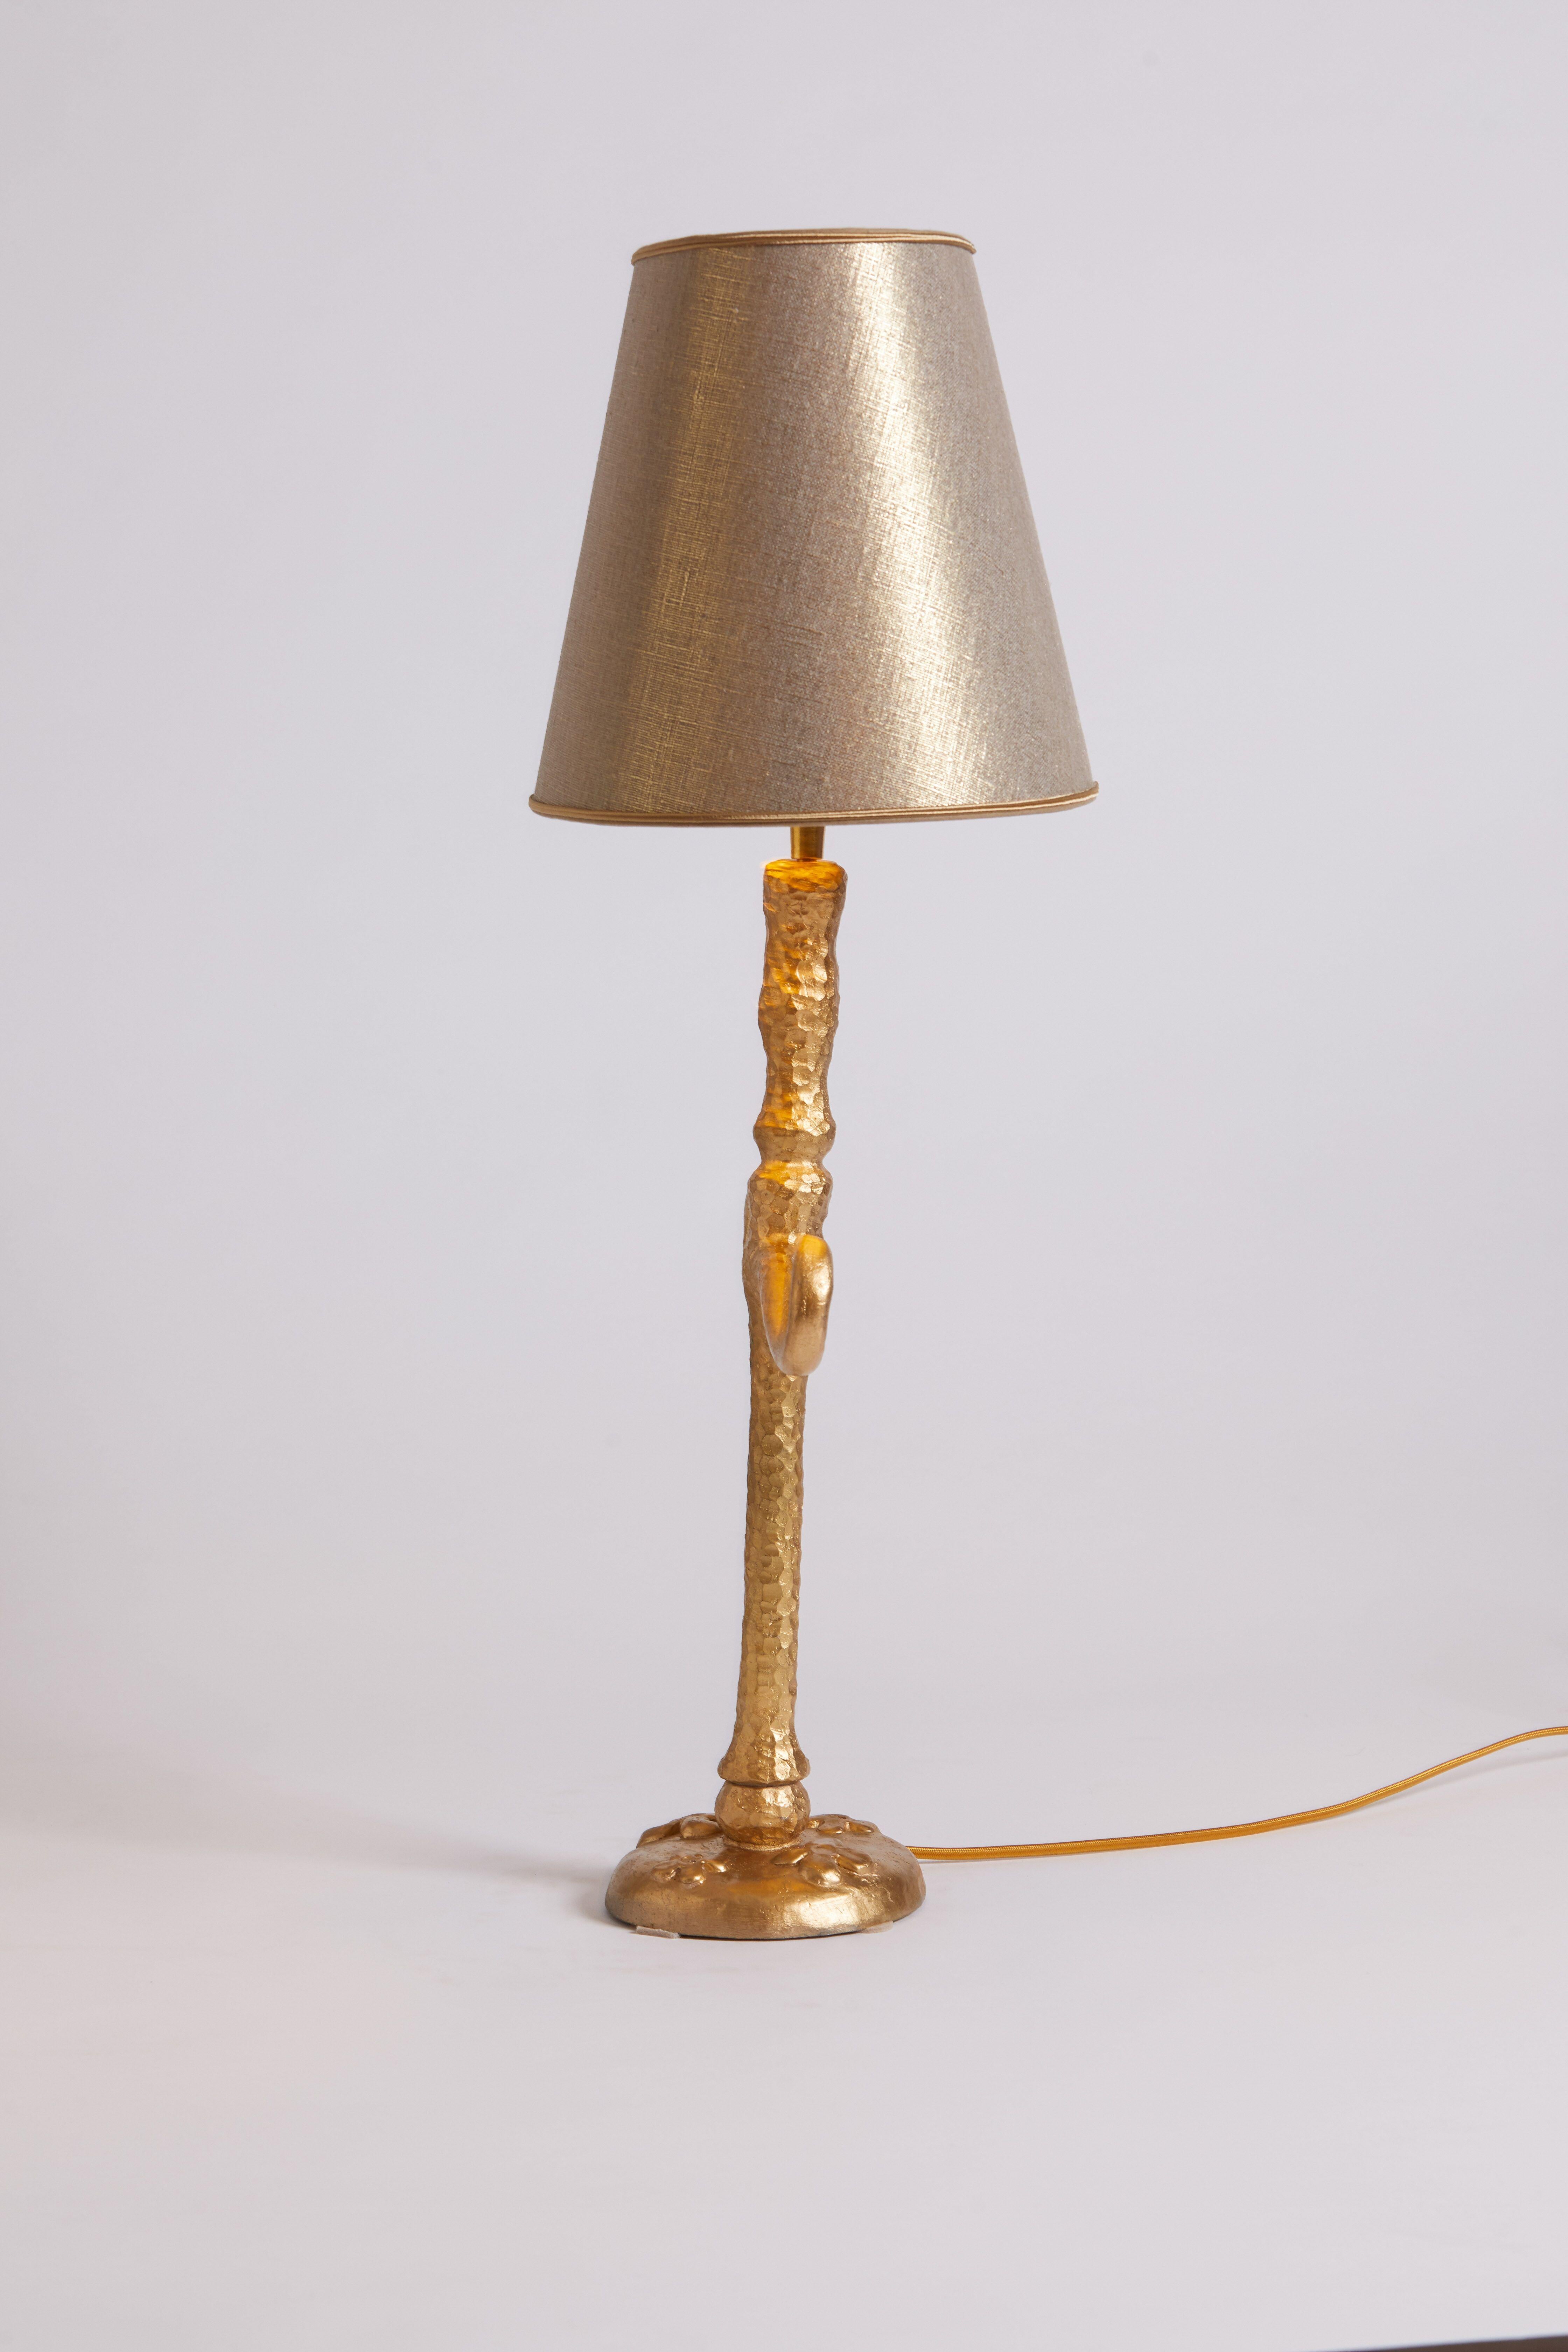 1980s rare gilt bronze table lamp by Fondica with a metallic shade.